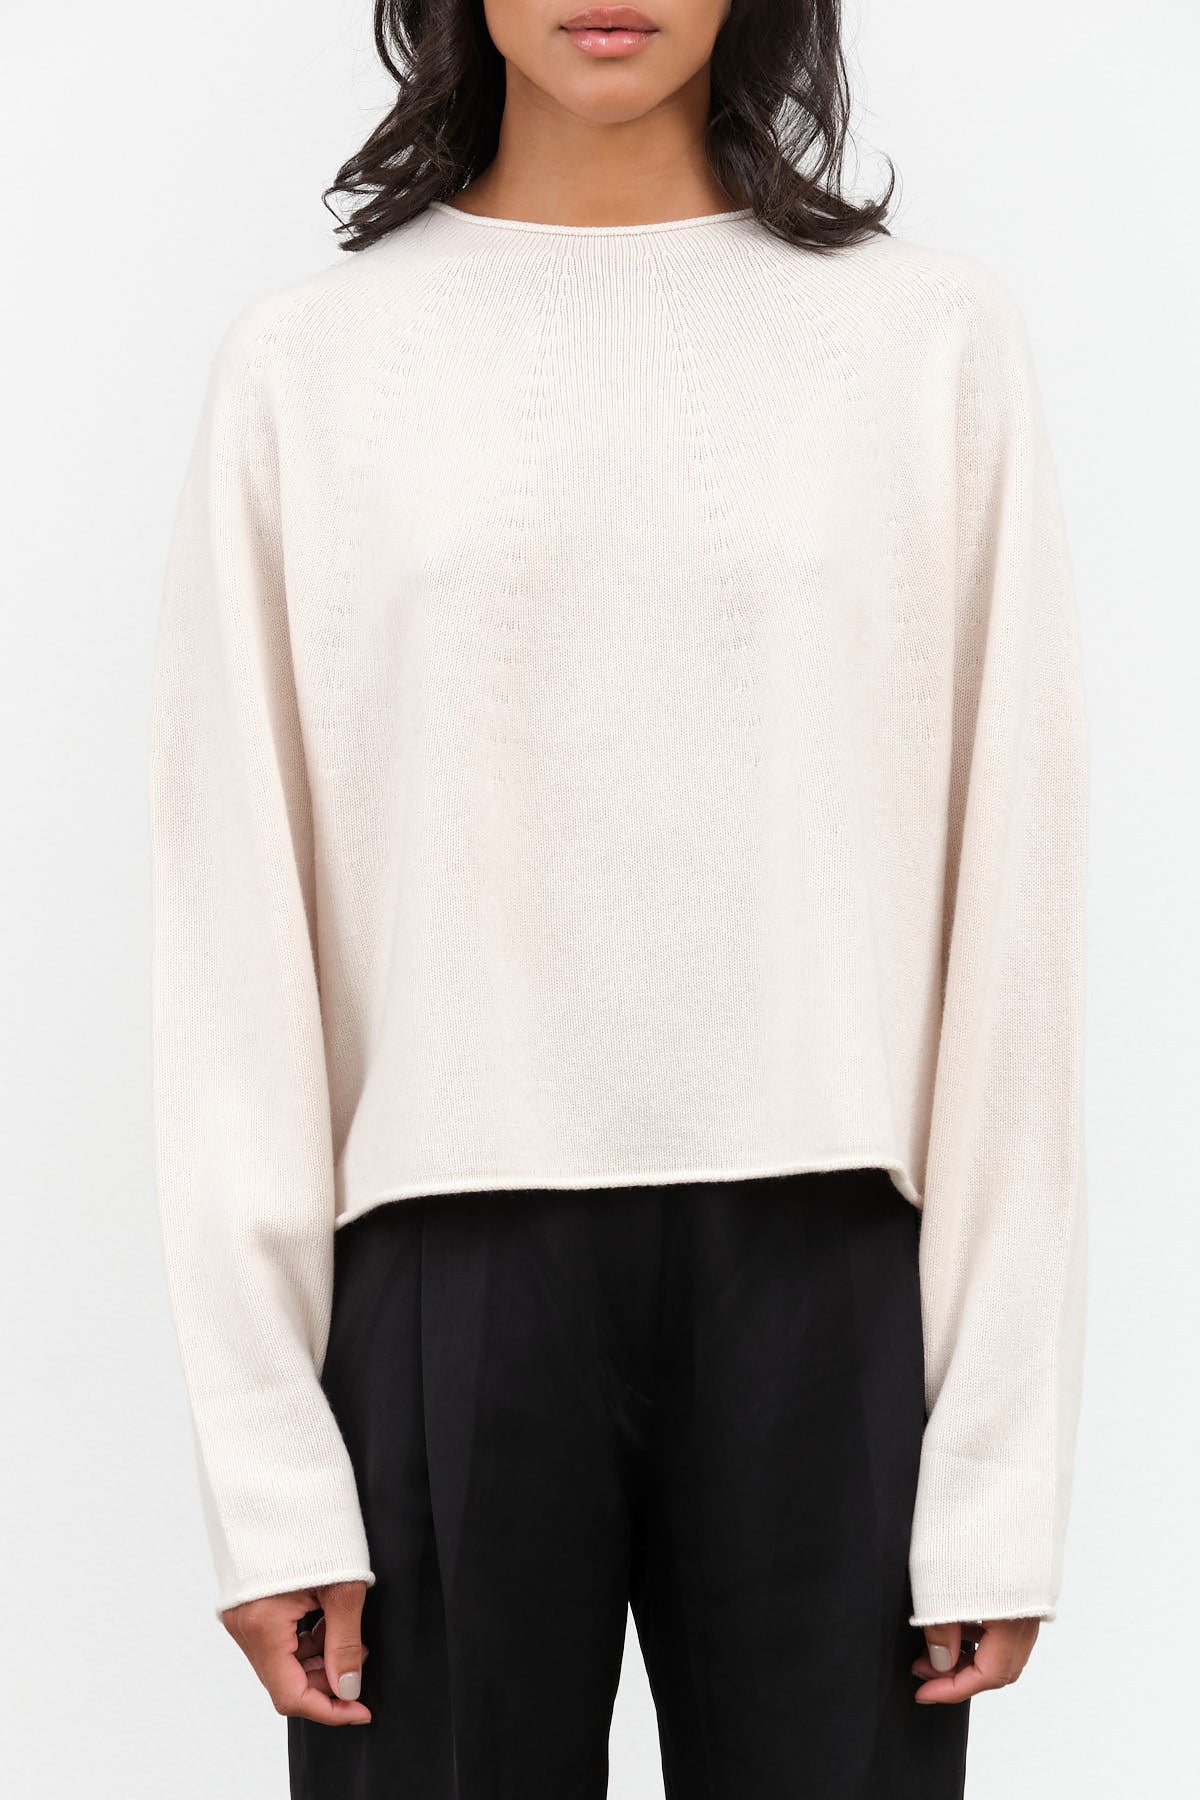 Kishiki Sweater by Christian Wijnants in Off White